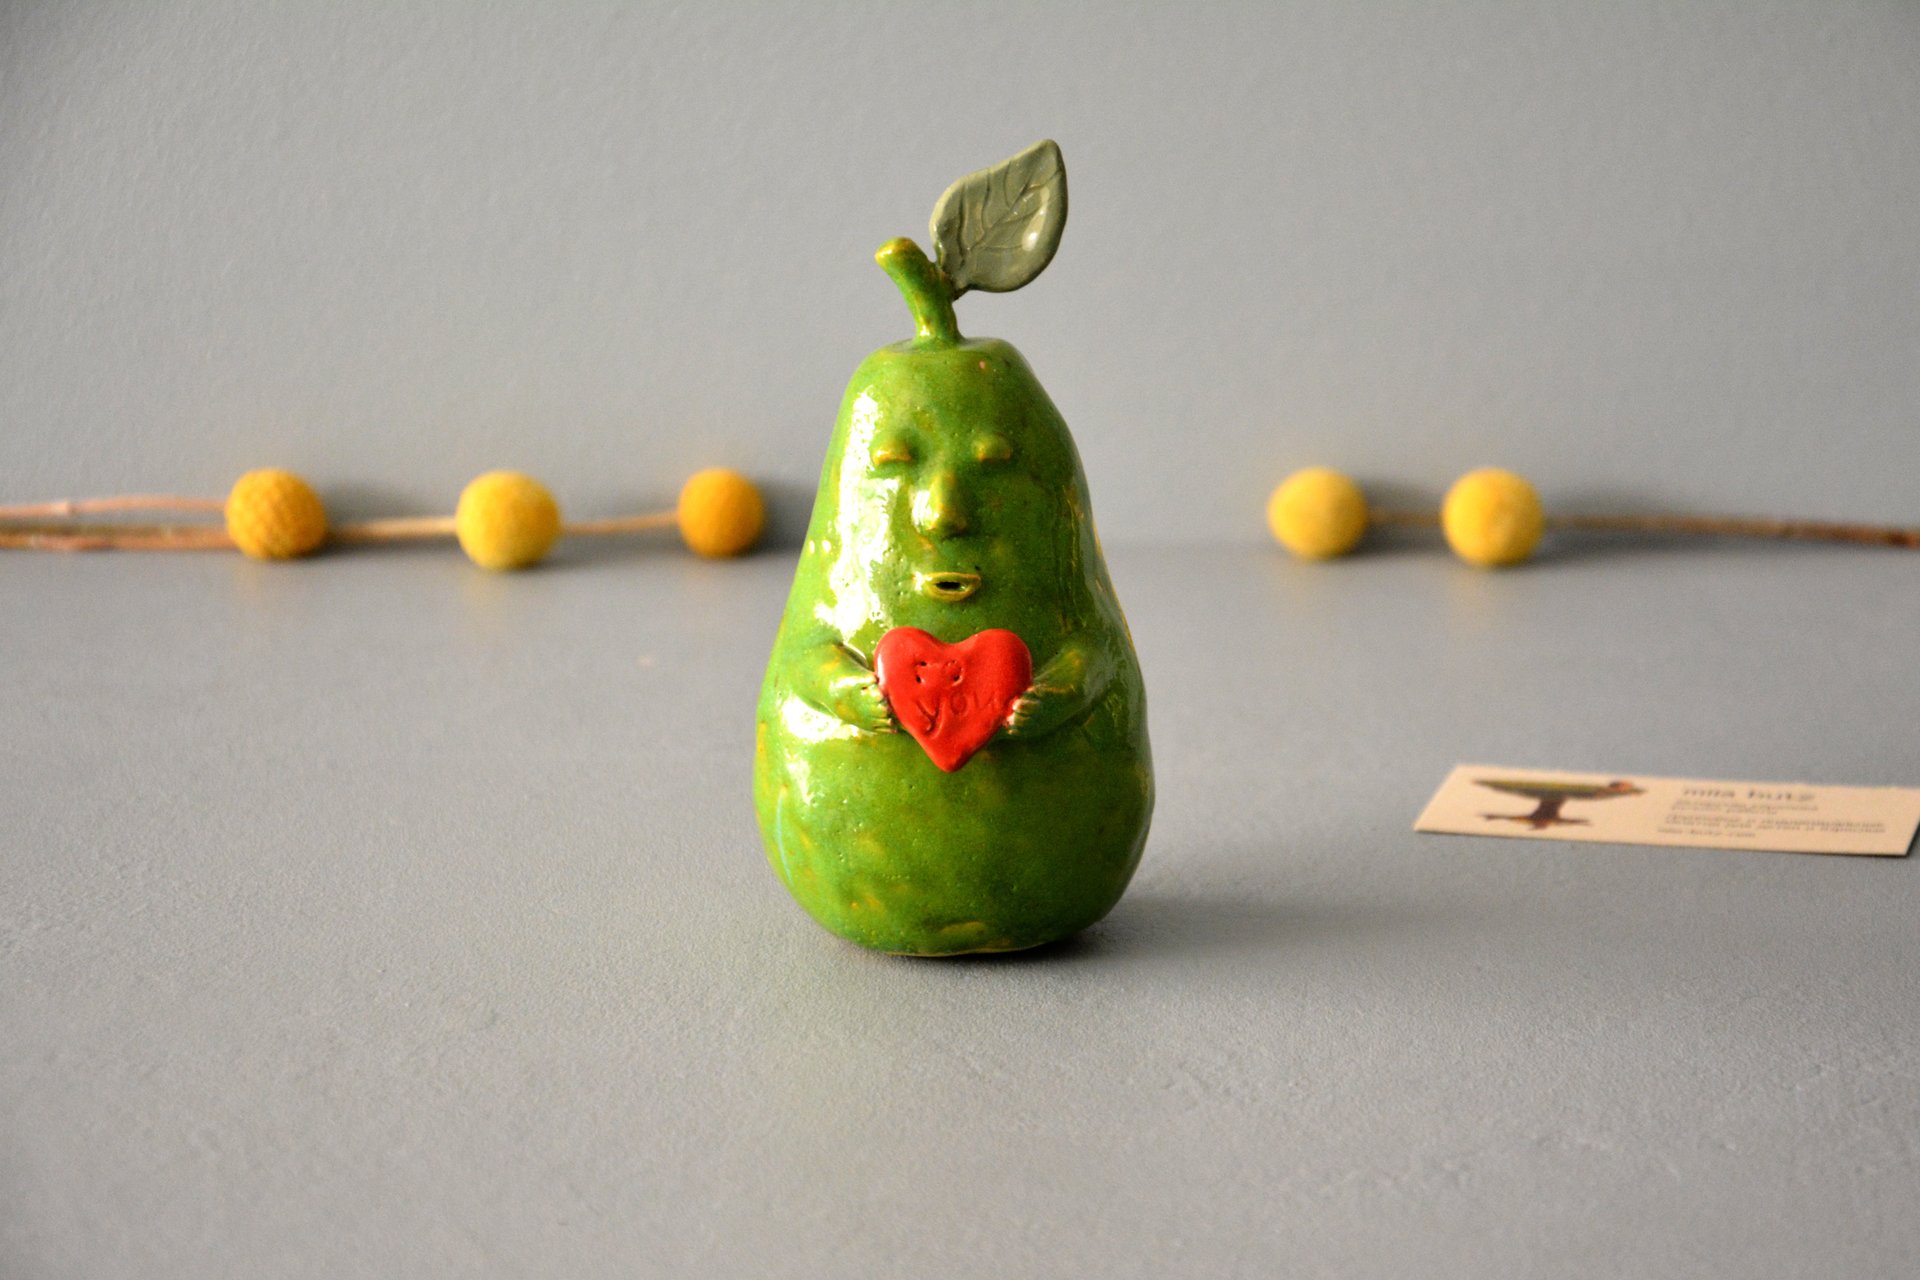 Pear with Love - Ceramic other figures, height - 12 cm, photo 2 of 5.